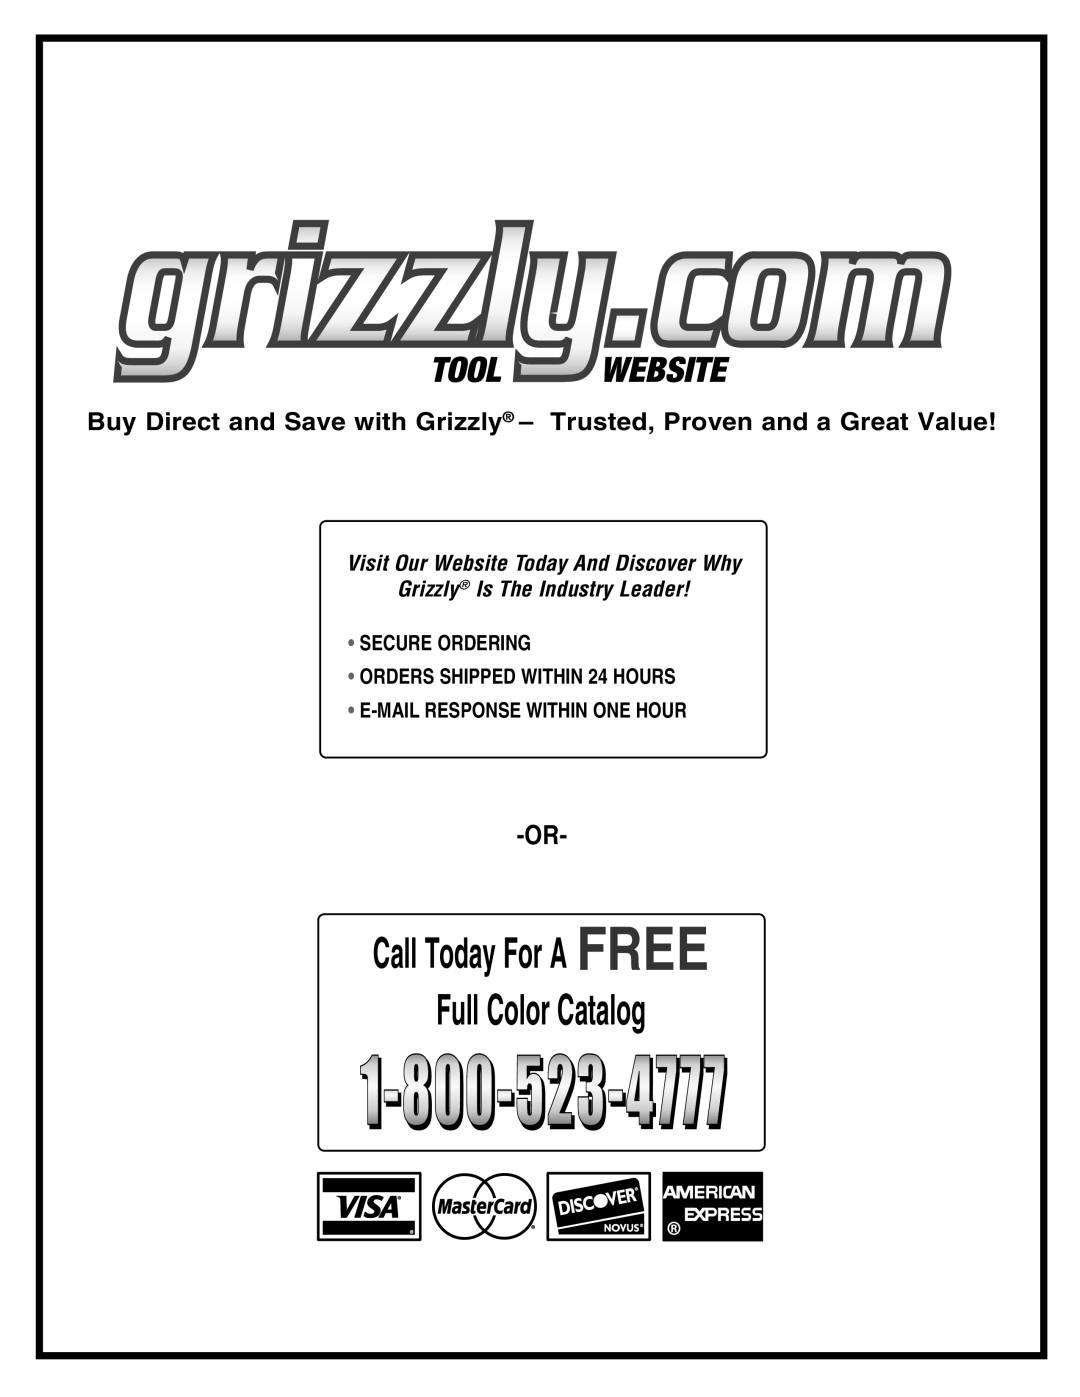 Grizzly G7153 manual Call Today For A FREE Full Color Catalog, Visit Our Website Today And Discover Why 